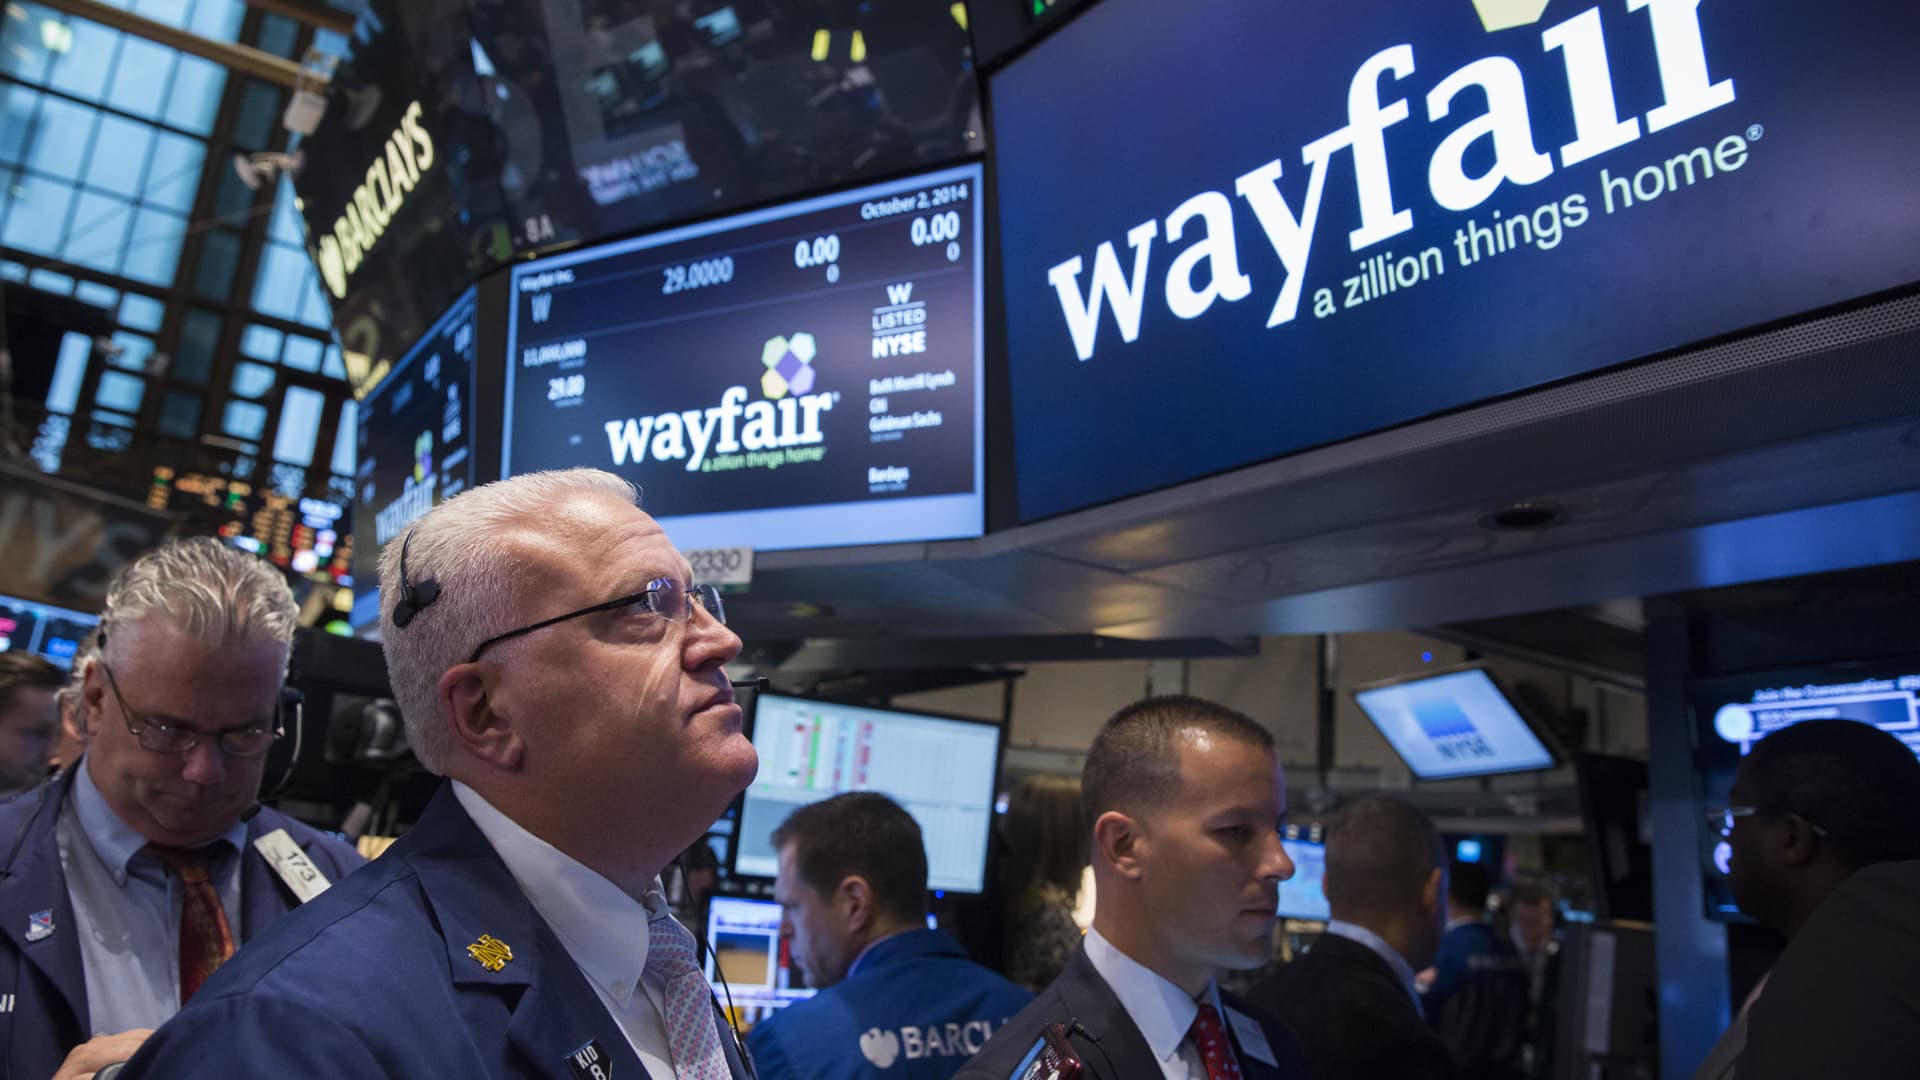 Wayfair shares surge after furniture retailer cuts losses by more than $100 million